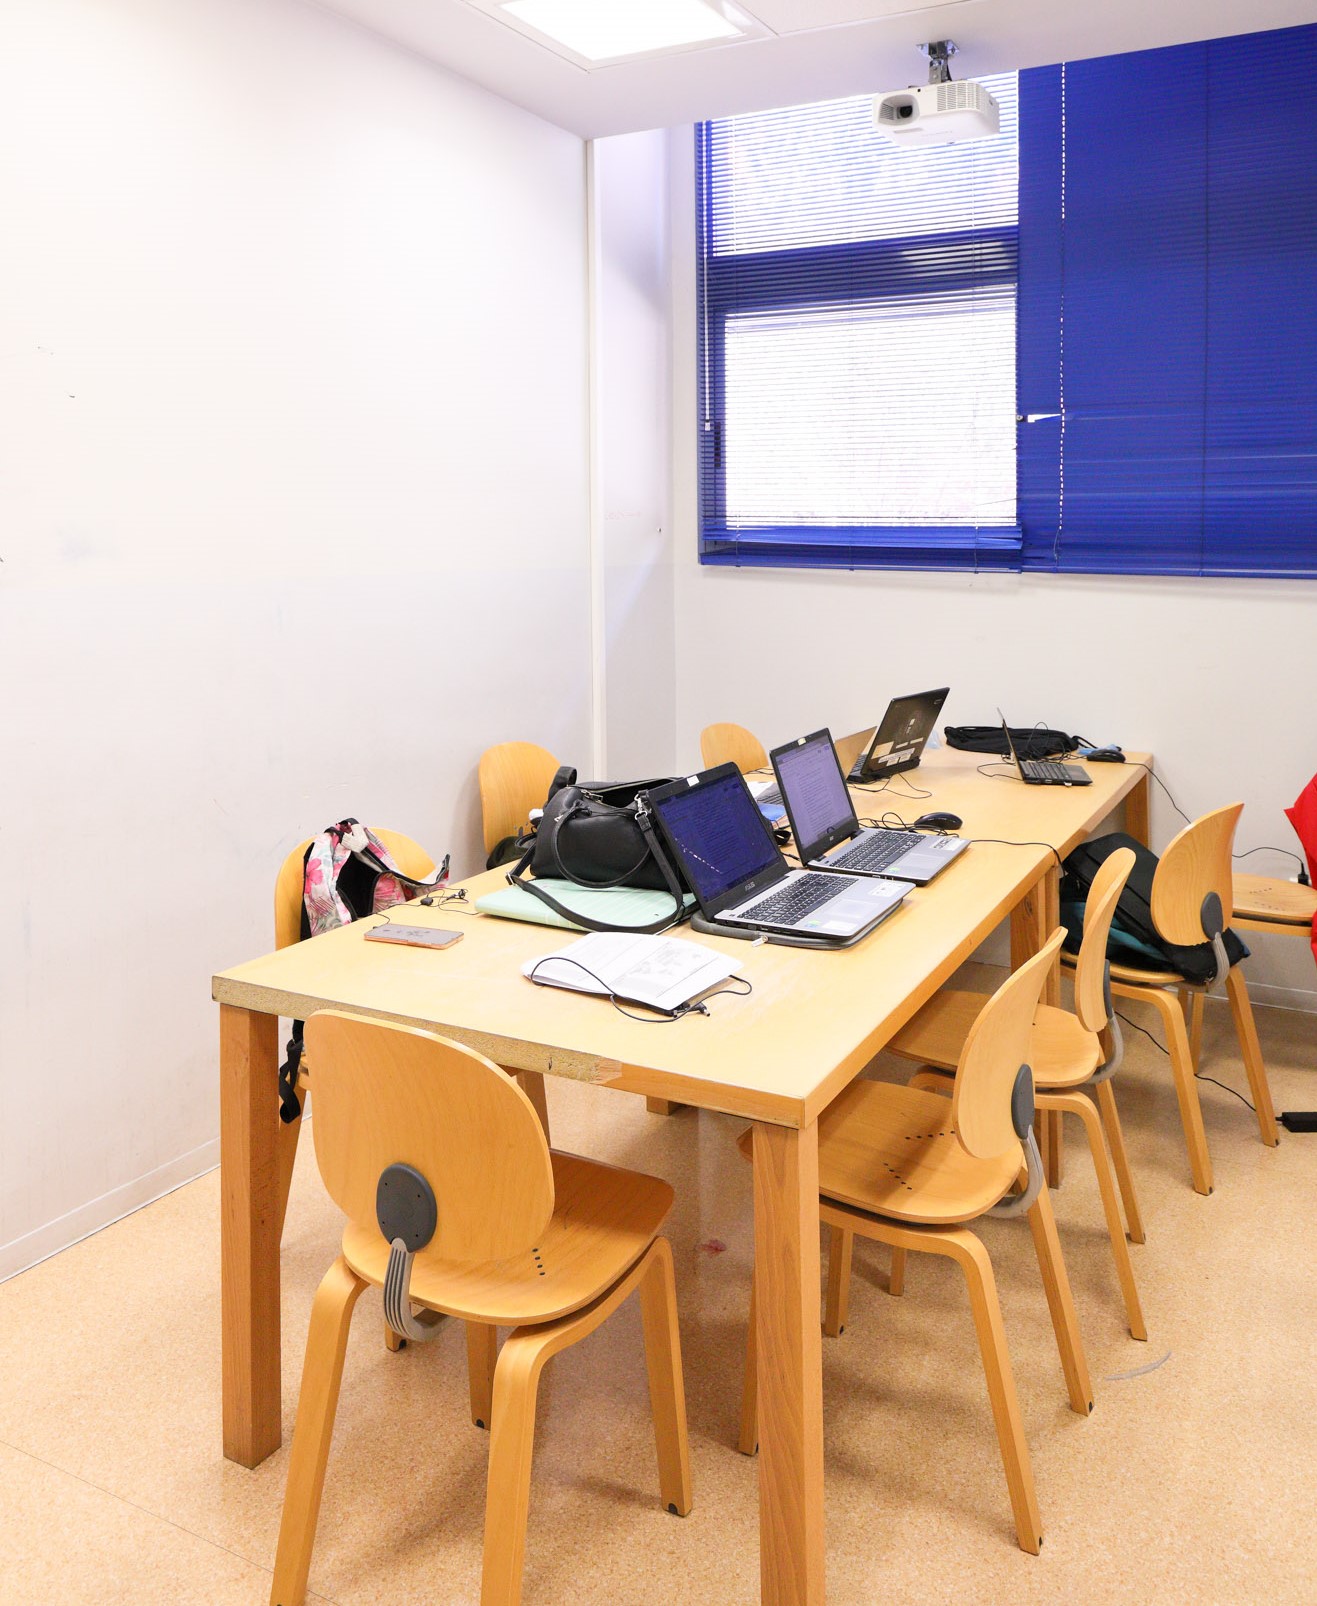 Group work rooms